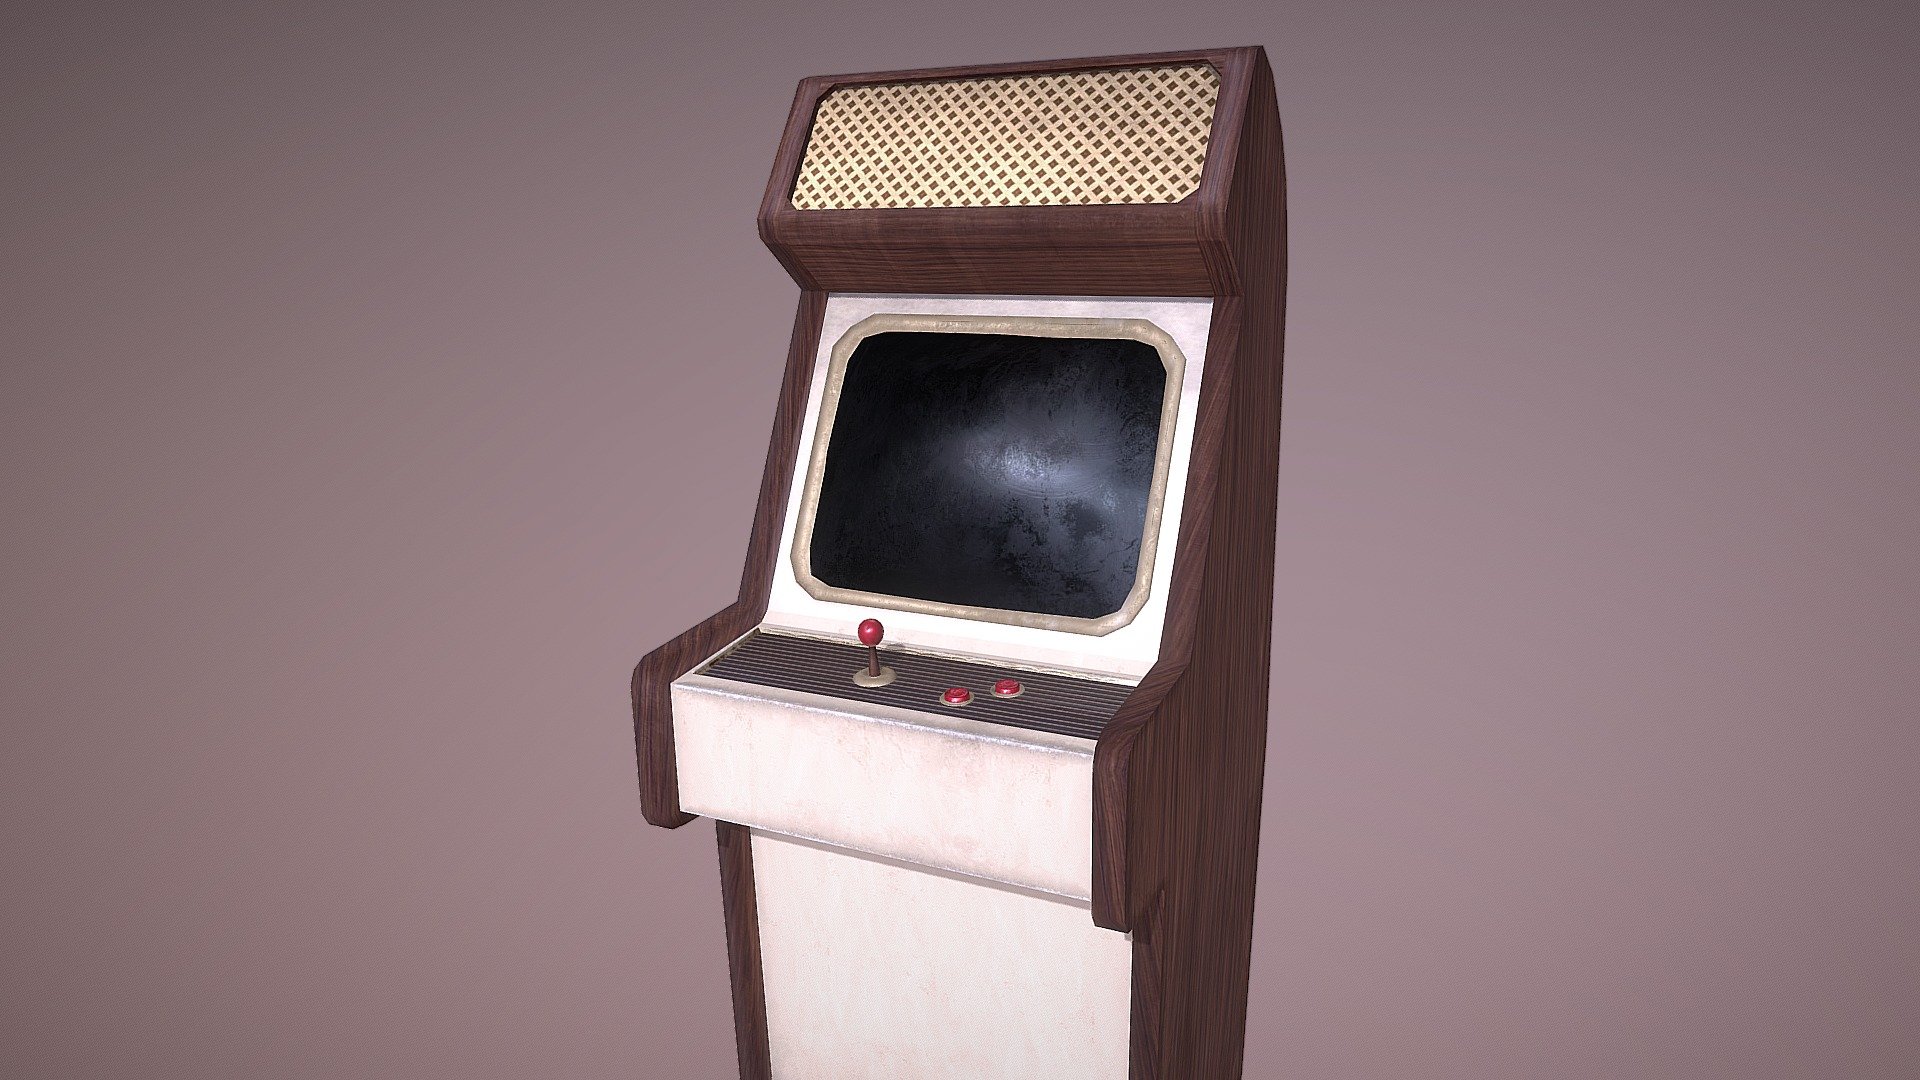 A mashup of a simple arcade cabinet and retro, 50's-ish tube radio. Made for the Sketchfab November Challenge (2019), with the theme Retro Electronics.

Software:
- Blender 2.8
- Substance Painter
- Photoshop - Retro Arcade Cabinet - Buy Royalty Free 3D model by riikkakilpelainen 3d model